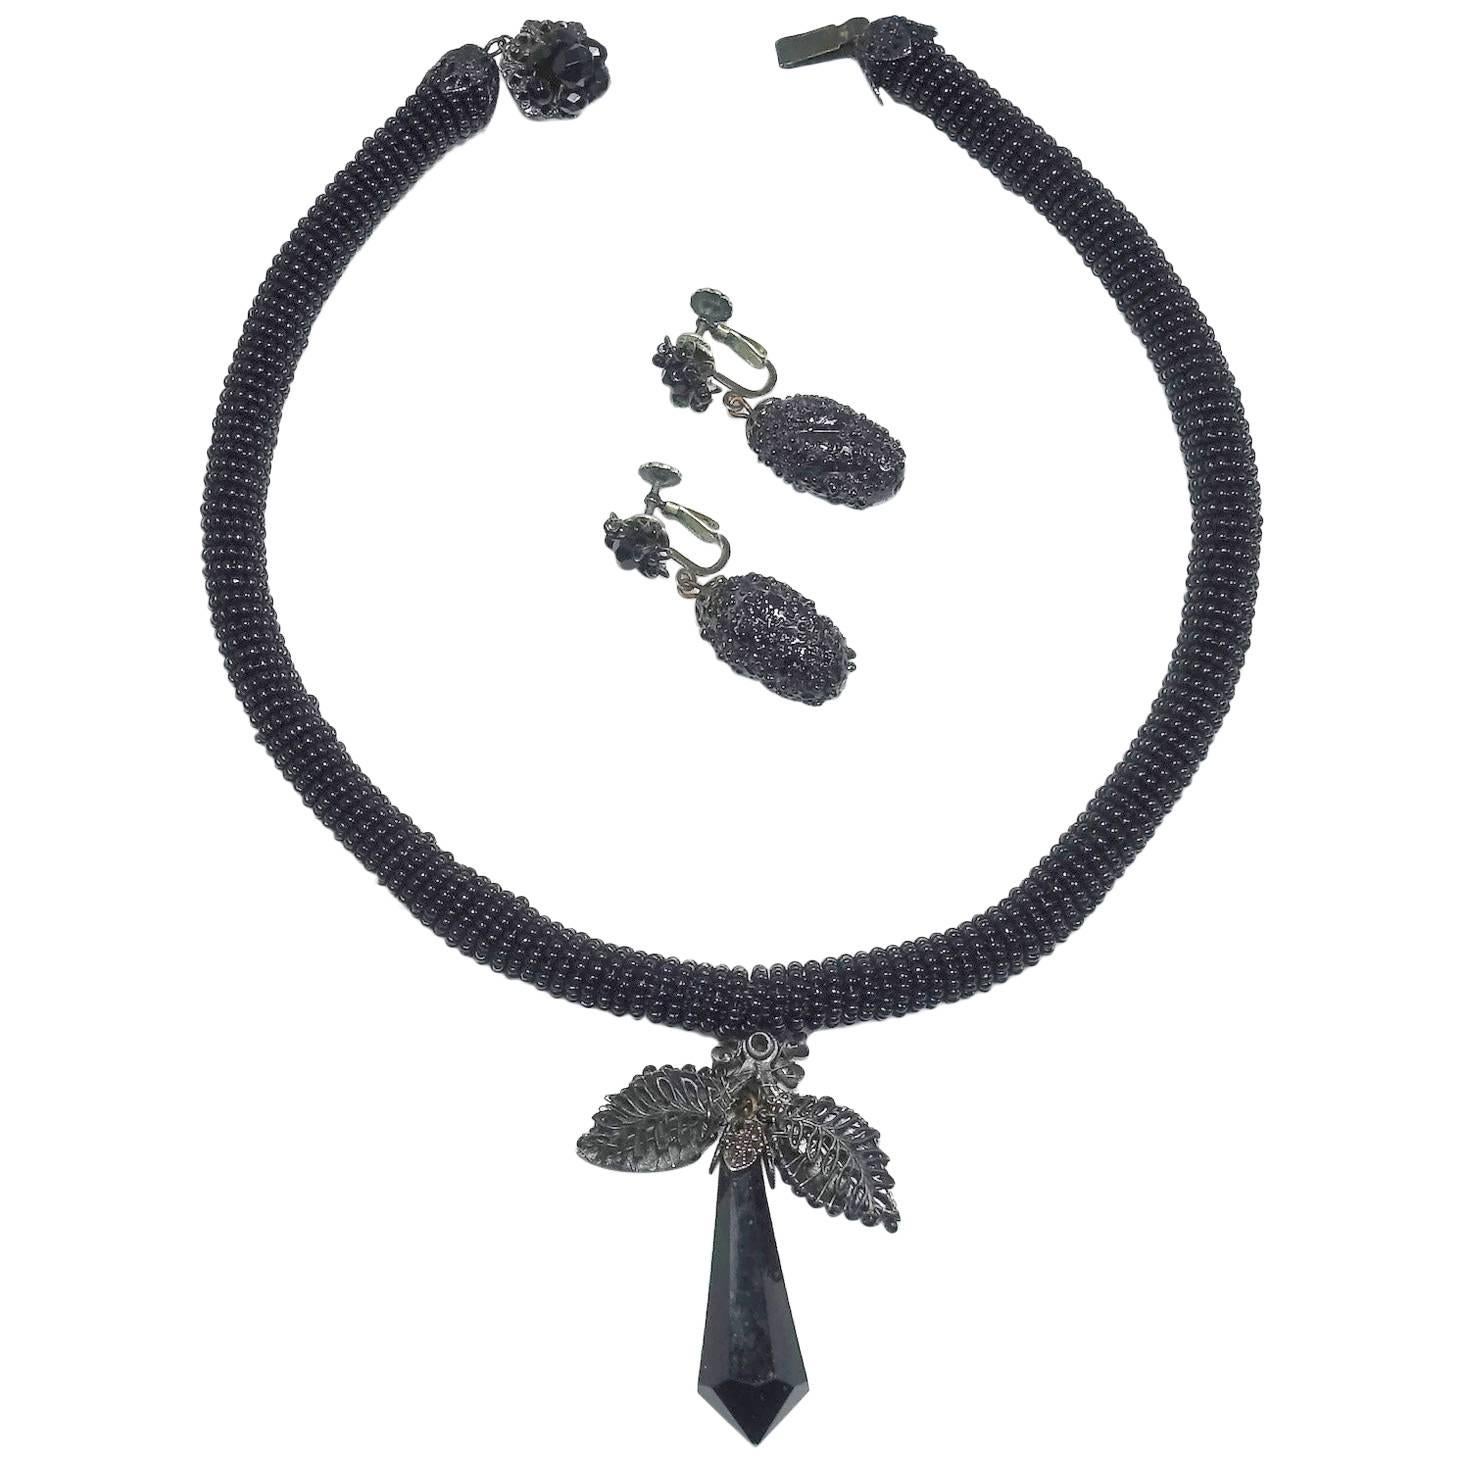 Rare Vintage 1950s Miriam Haskell Black Jet Beaded Drop Necklace & Earring Set For Sale